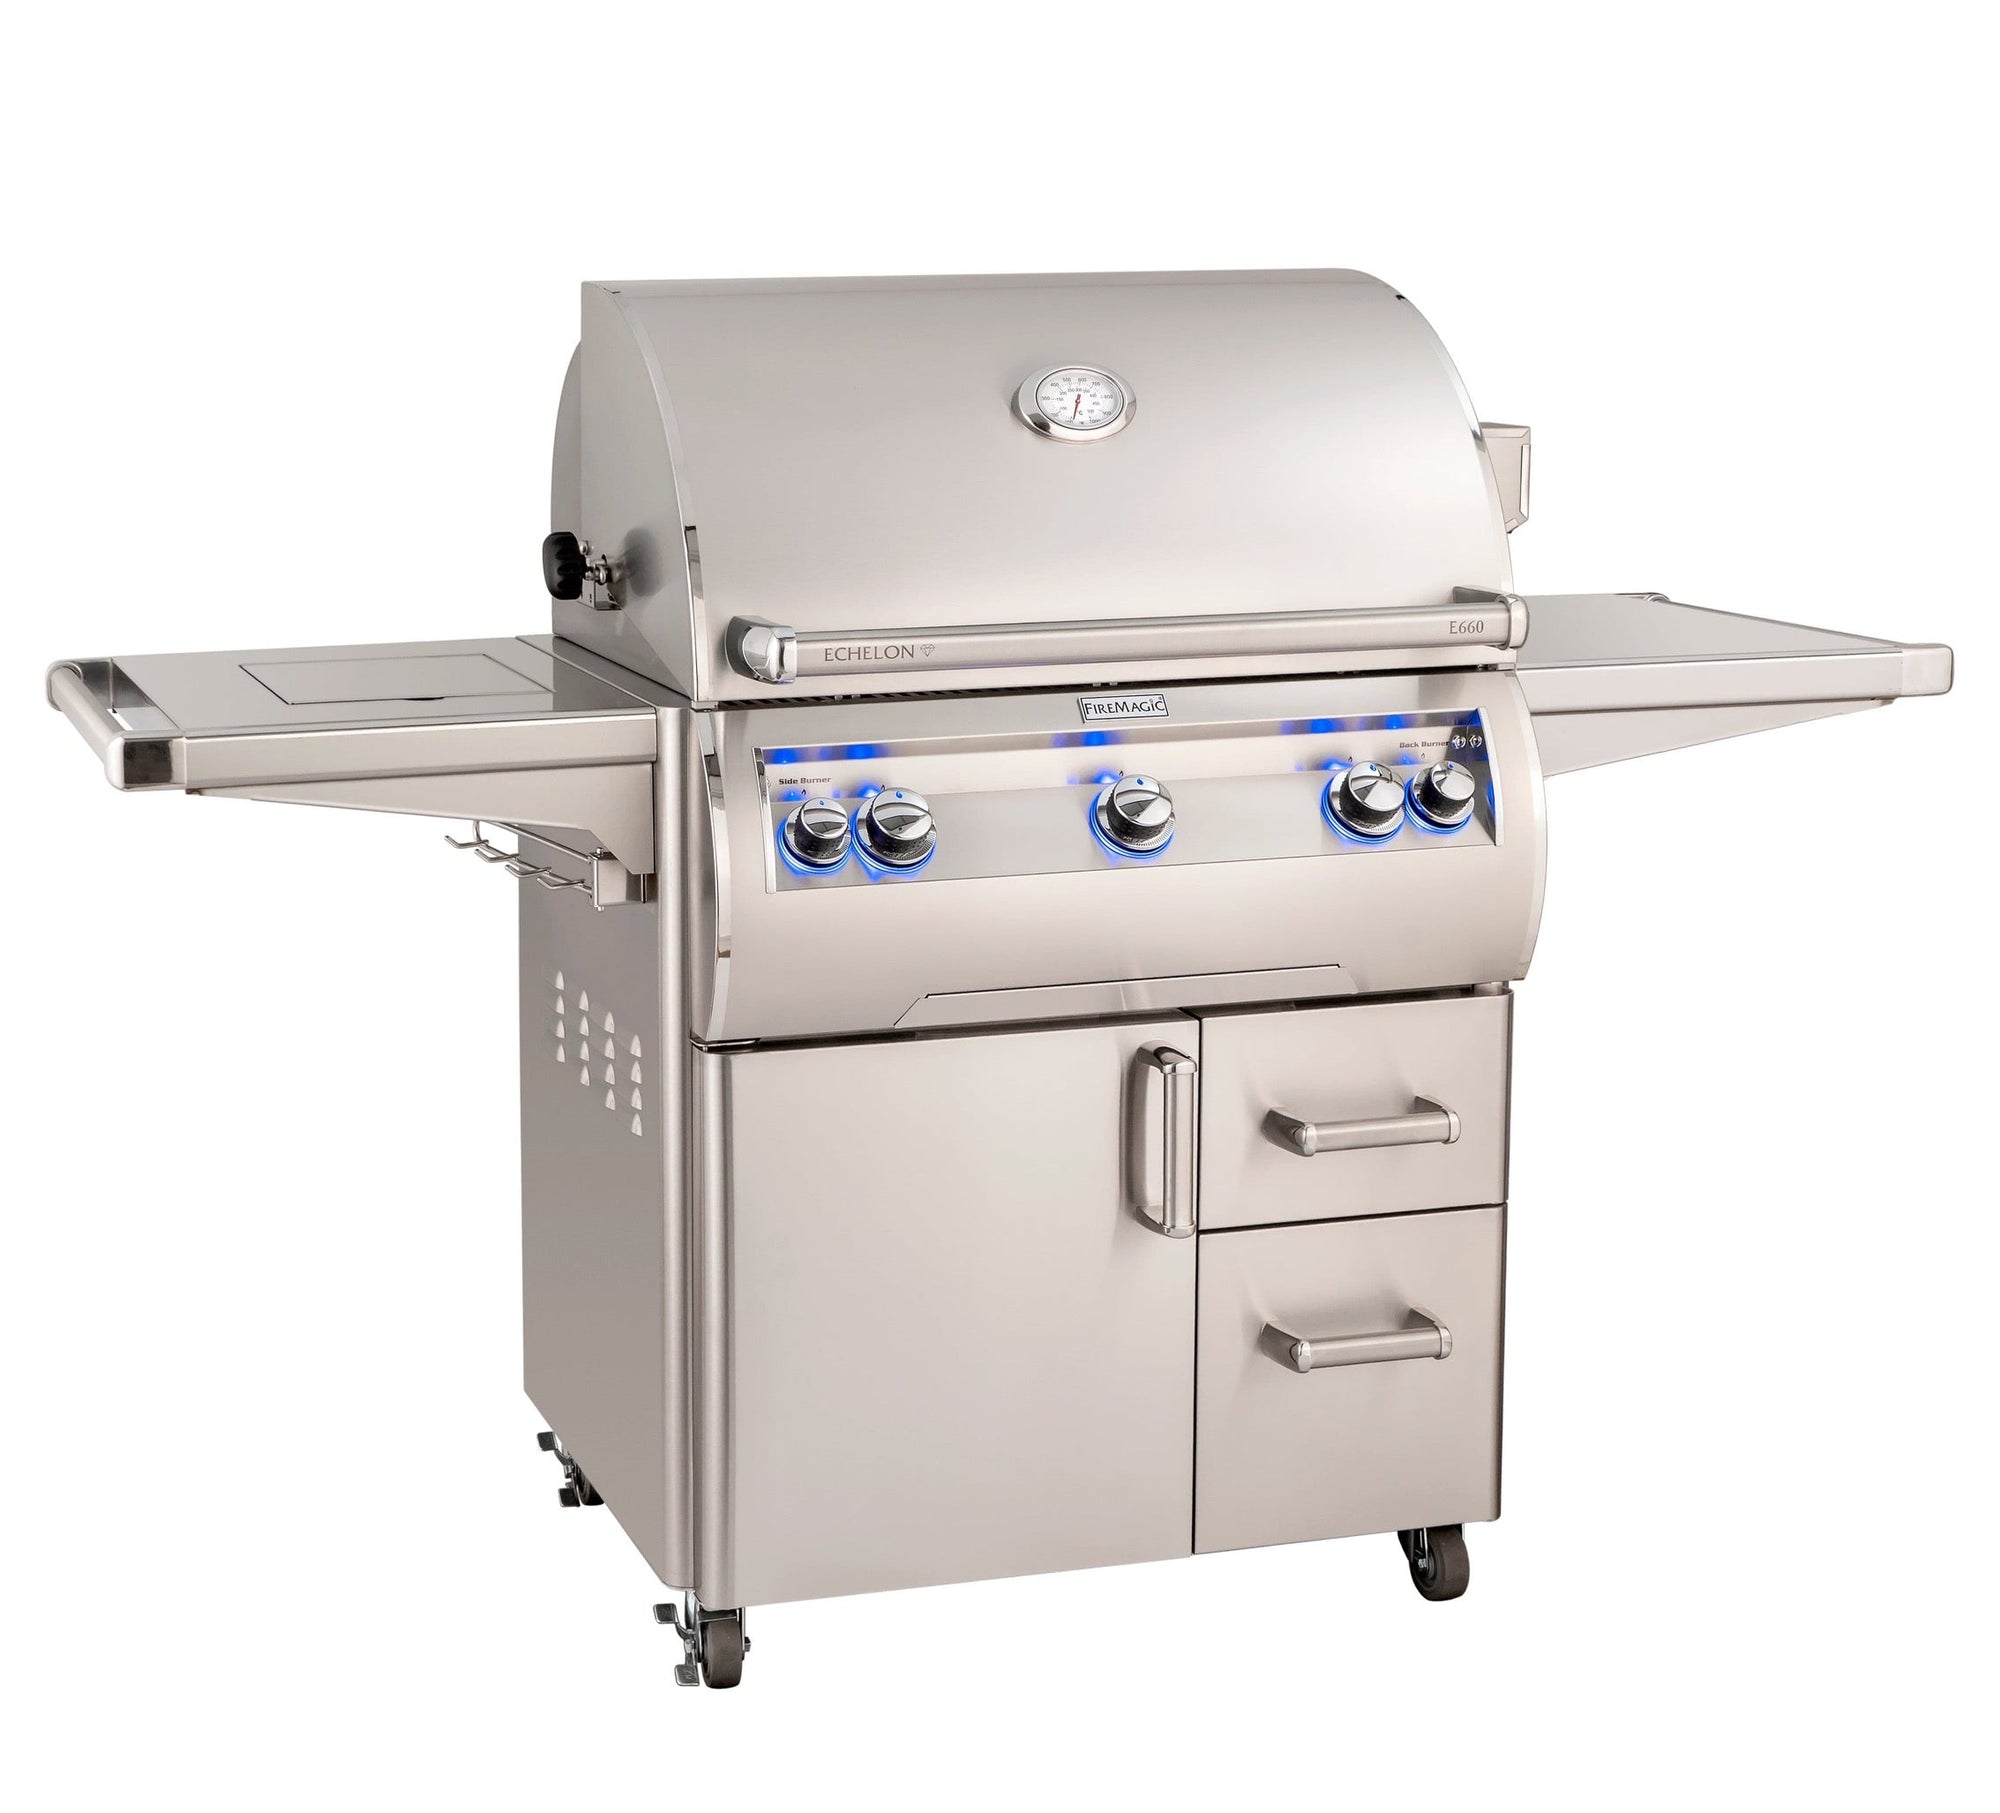 Firemagic Grills Fire Magic Echelon Diamond E660s Portable Grill with Rotisserie, Analog Thermometer and Flush Mounted Single Side Burner / E660s-9EAN(P)-62, E660s-9LAN(P)-62, E660s-9EAN(P)-62-W, E660s-9LAN(P)-62-W